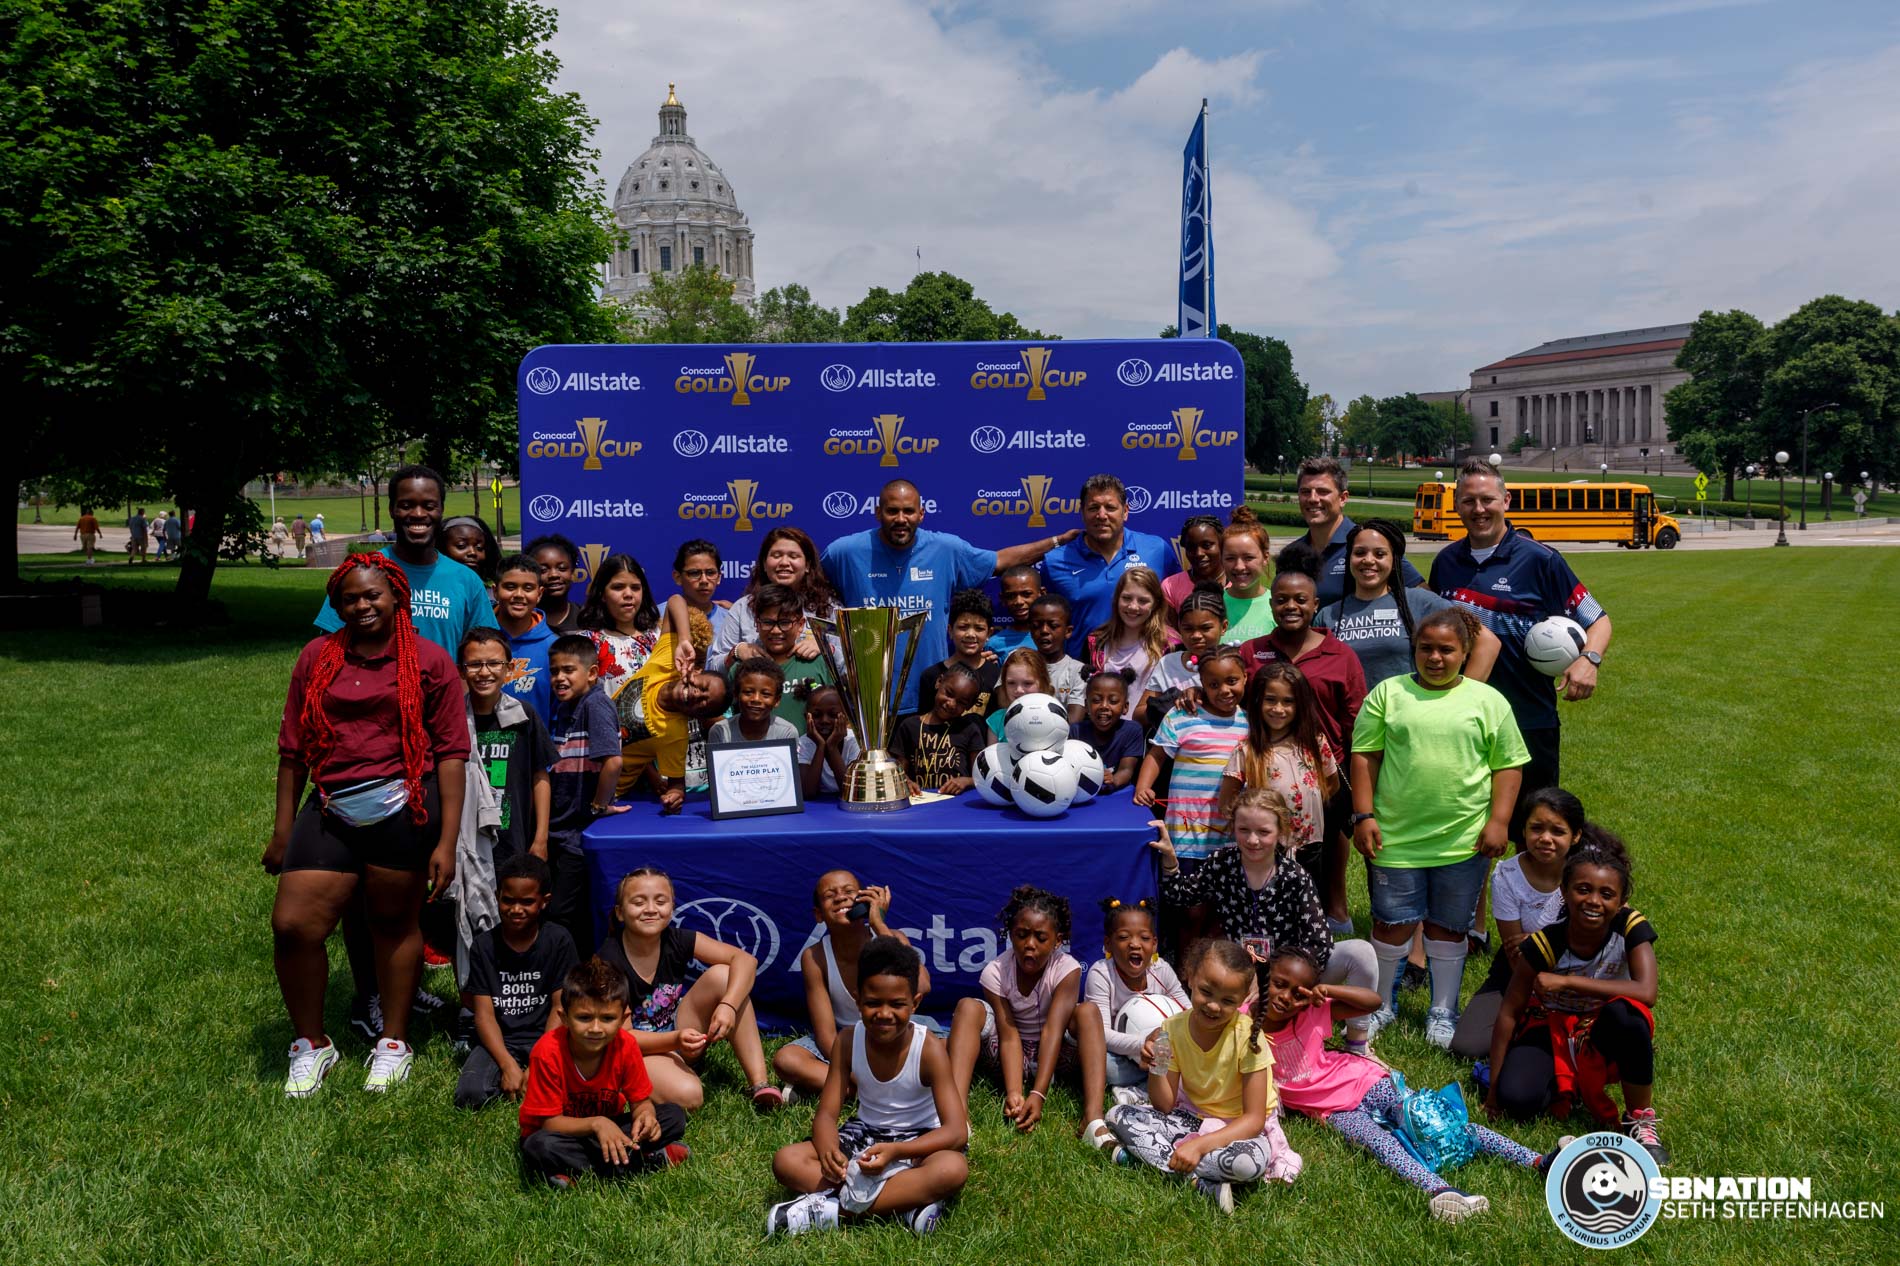 June 17, 2019 - Saint Paul, Minnesota, United States - Kids and staff from The Sanneh Foundation pose for a photo while at the Allstate Day For Play event on the lawn of the Minnesota State Capitol. 
